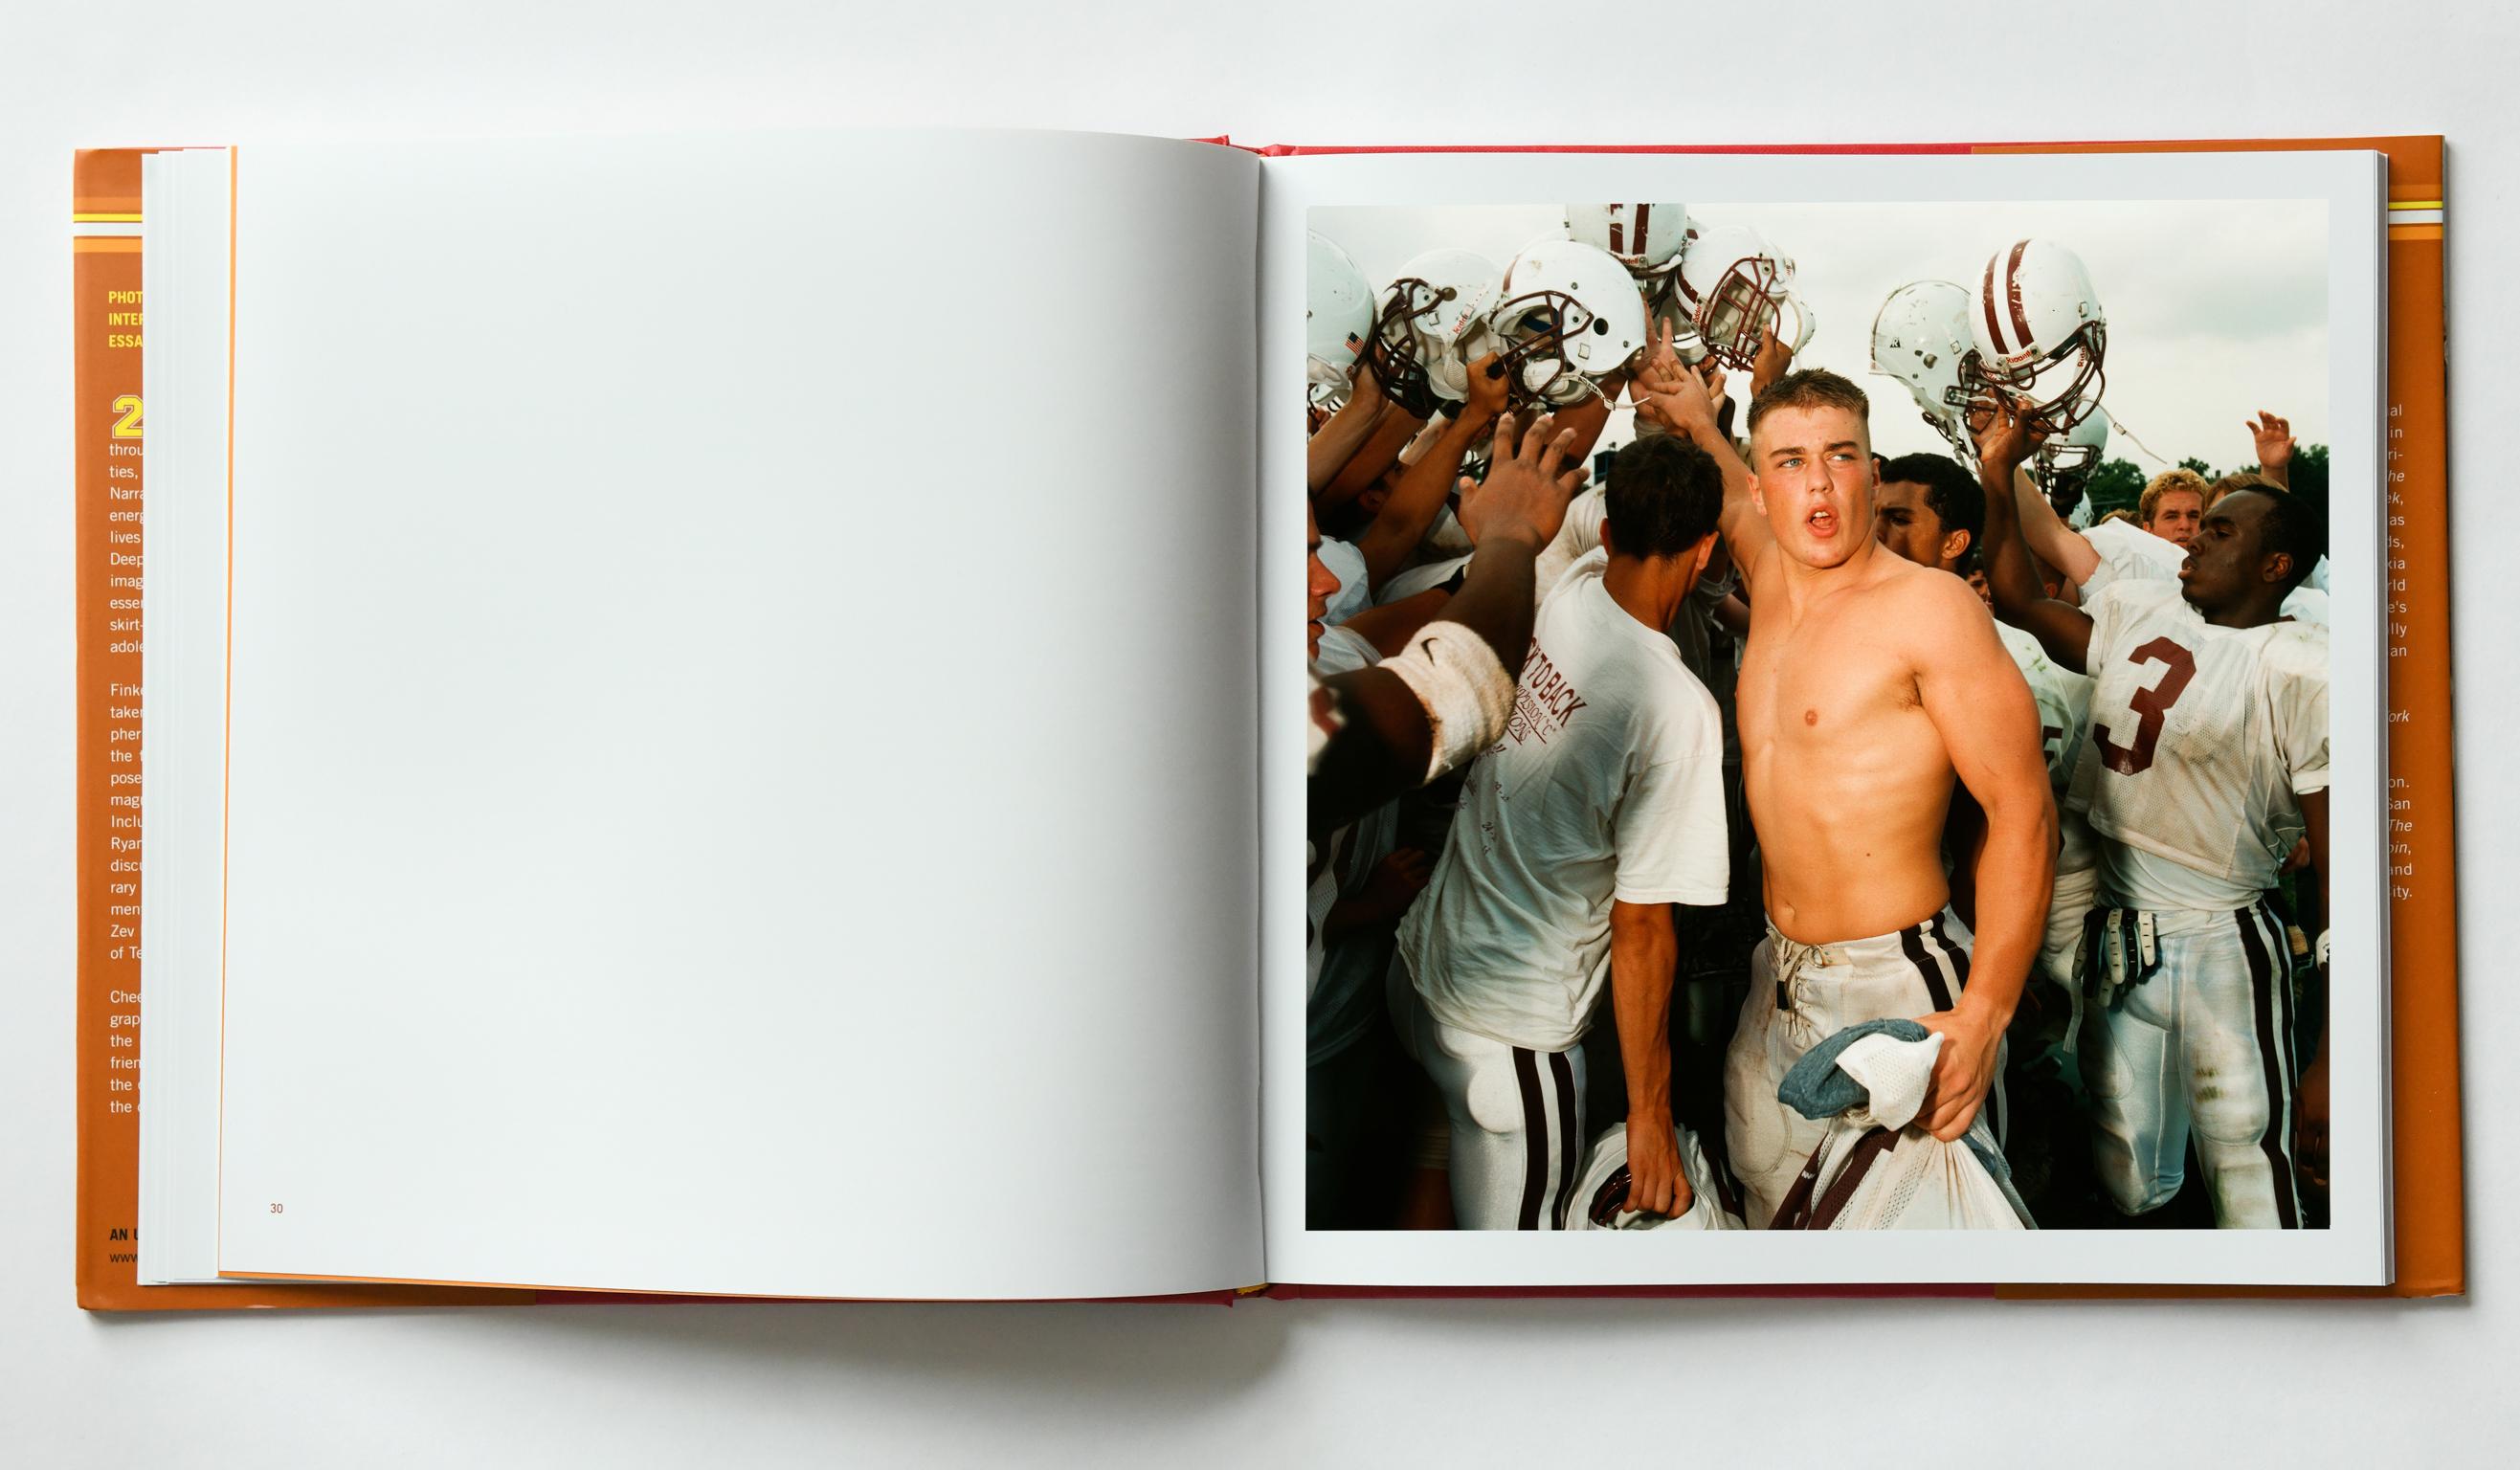 2.4.6.8: American Cheerleaders & Football Players, monograph  - Contemporary Photograph by Brian Finke